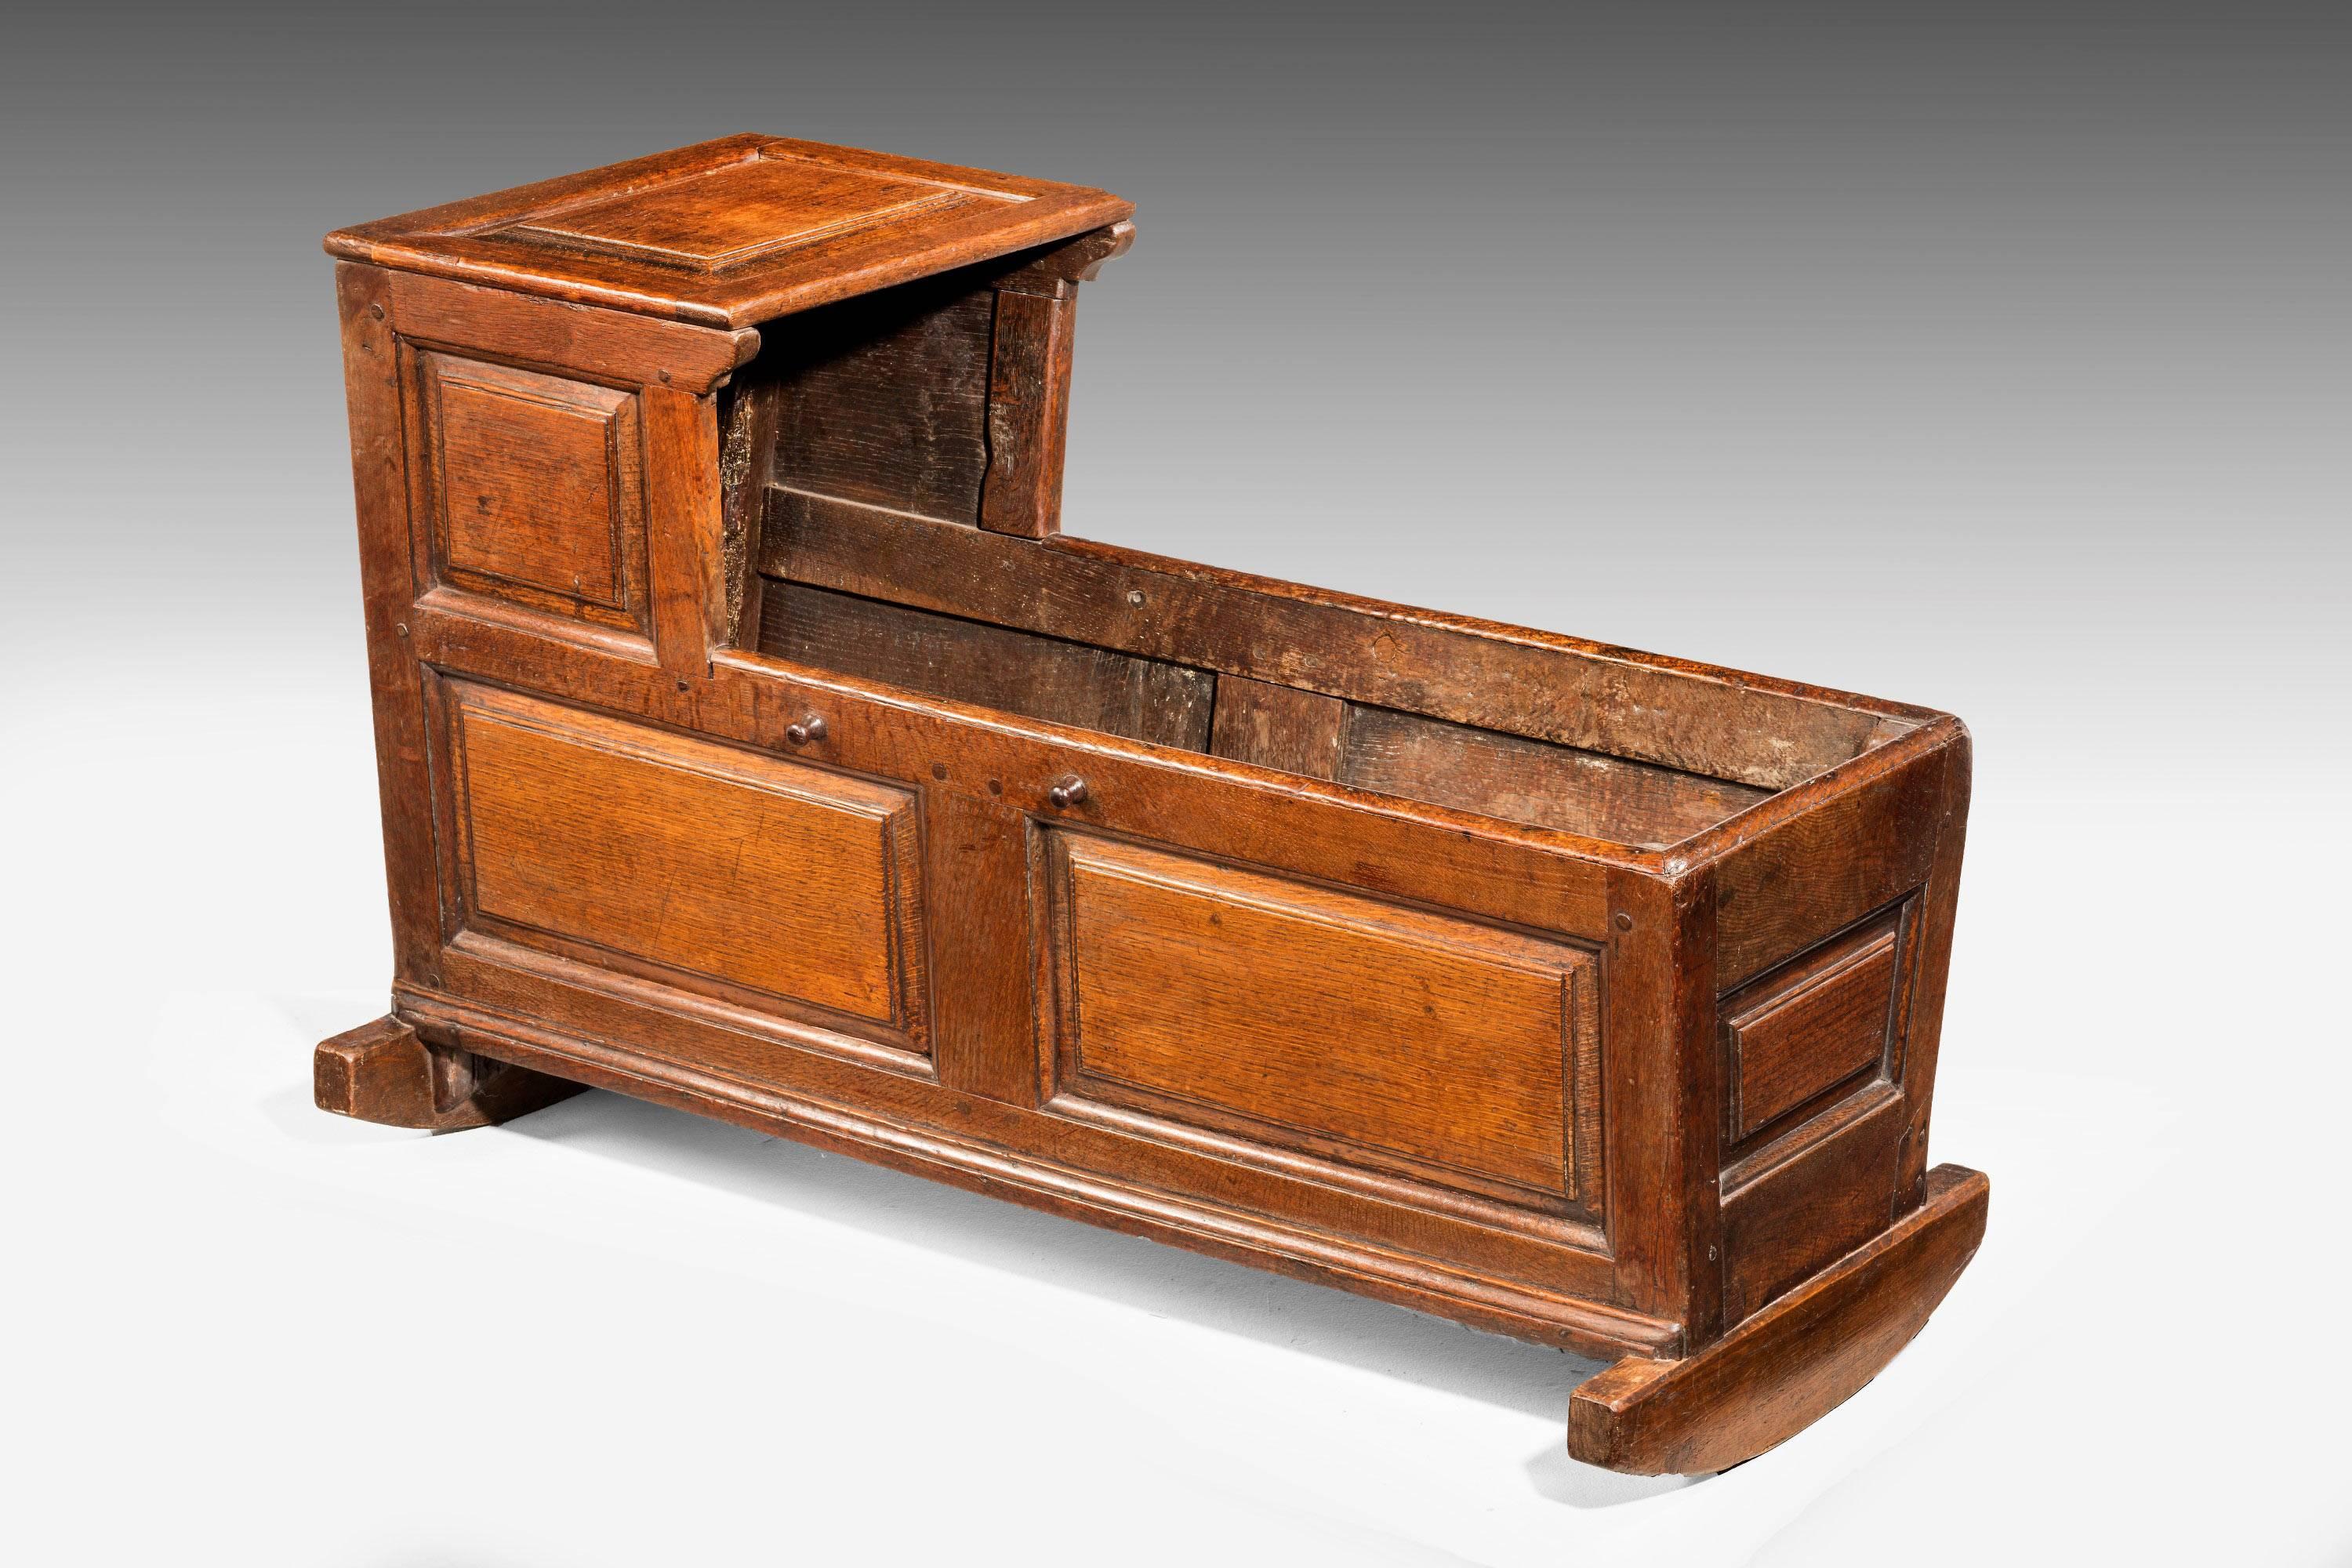 A good and original 18th century oak cradle. The timbers very well figured. The panelled sections to the top and sides. 

